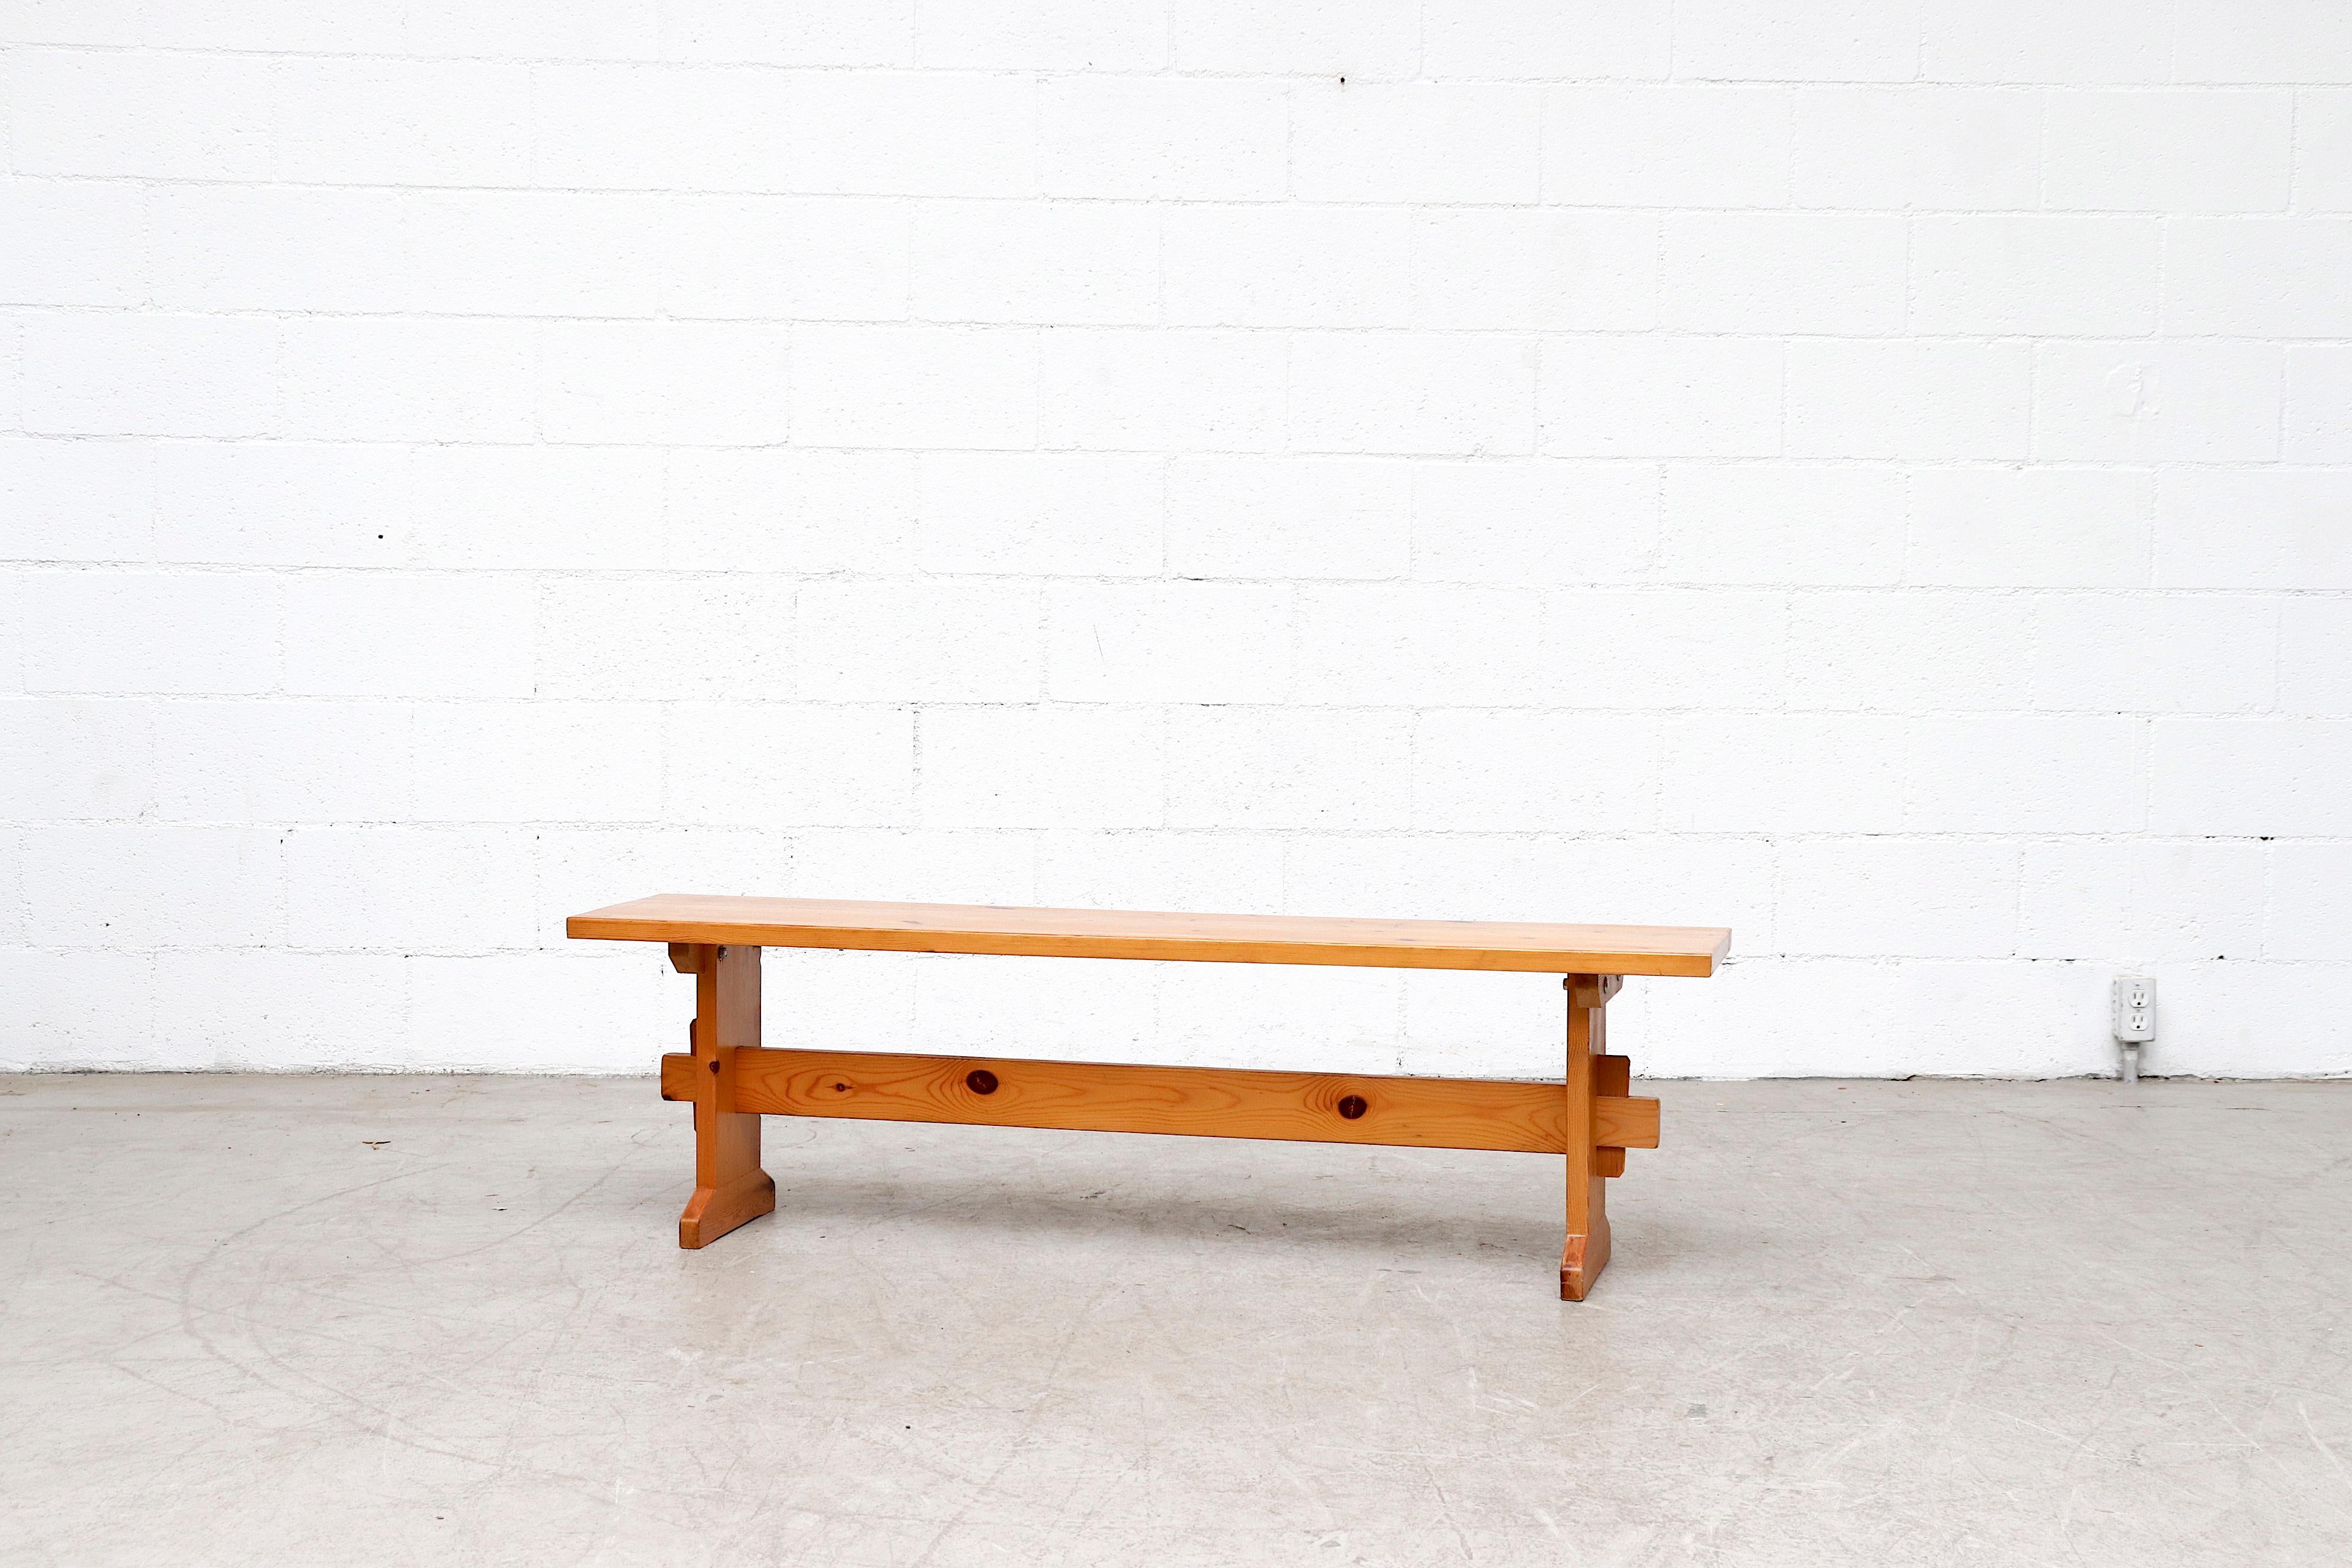 Small Borge Mogensen style natural pine bench. In original condition with wear consistent with its age and use. Shown with Borge Mogensen style trestle table (LU922418821542) other similar tables also available listed separately. (LU922419332232 +